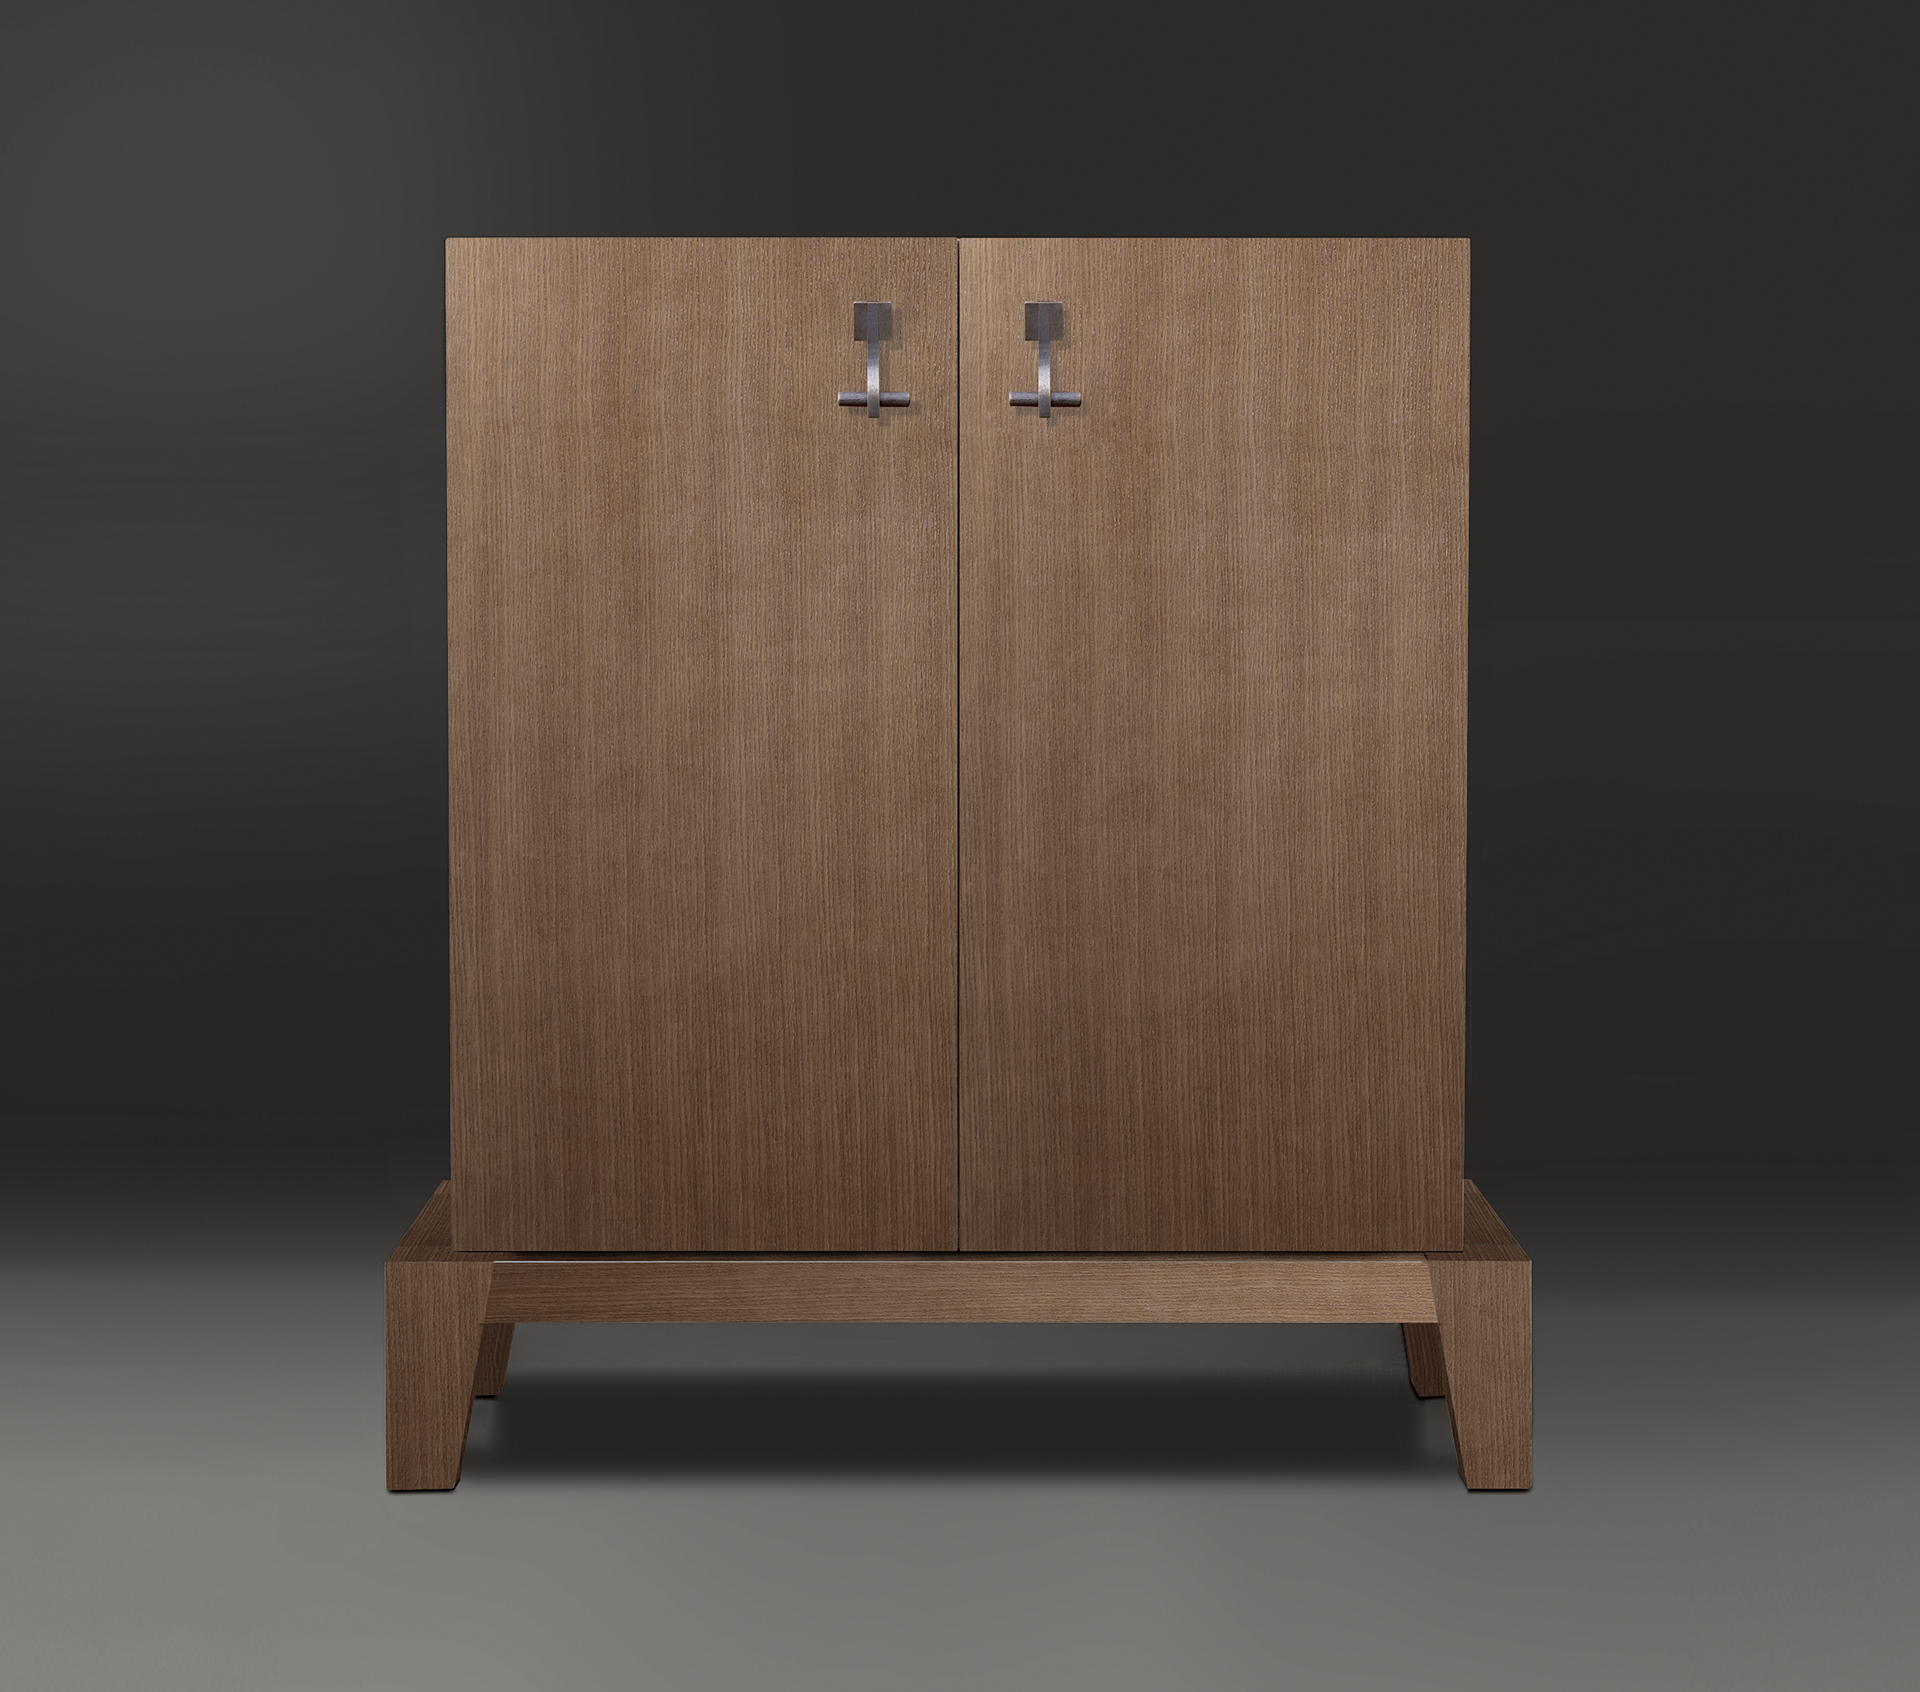 Detail of Amarcord in light grey mahogany with doors inlaid in amaranth wood, light grey mahogany and teak. 